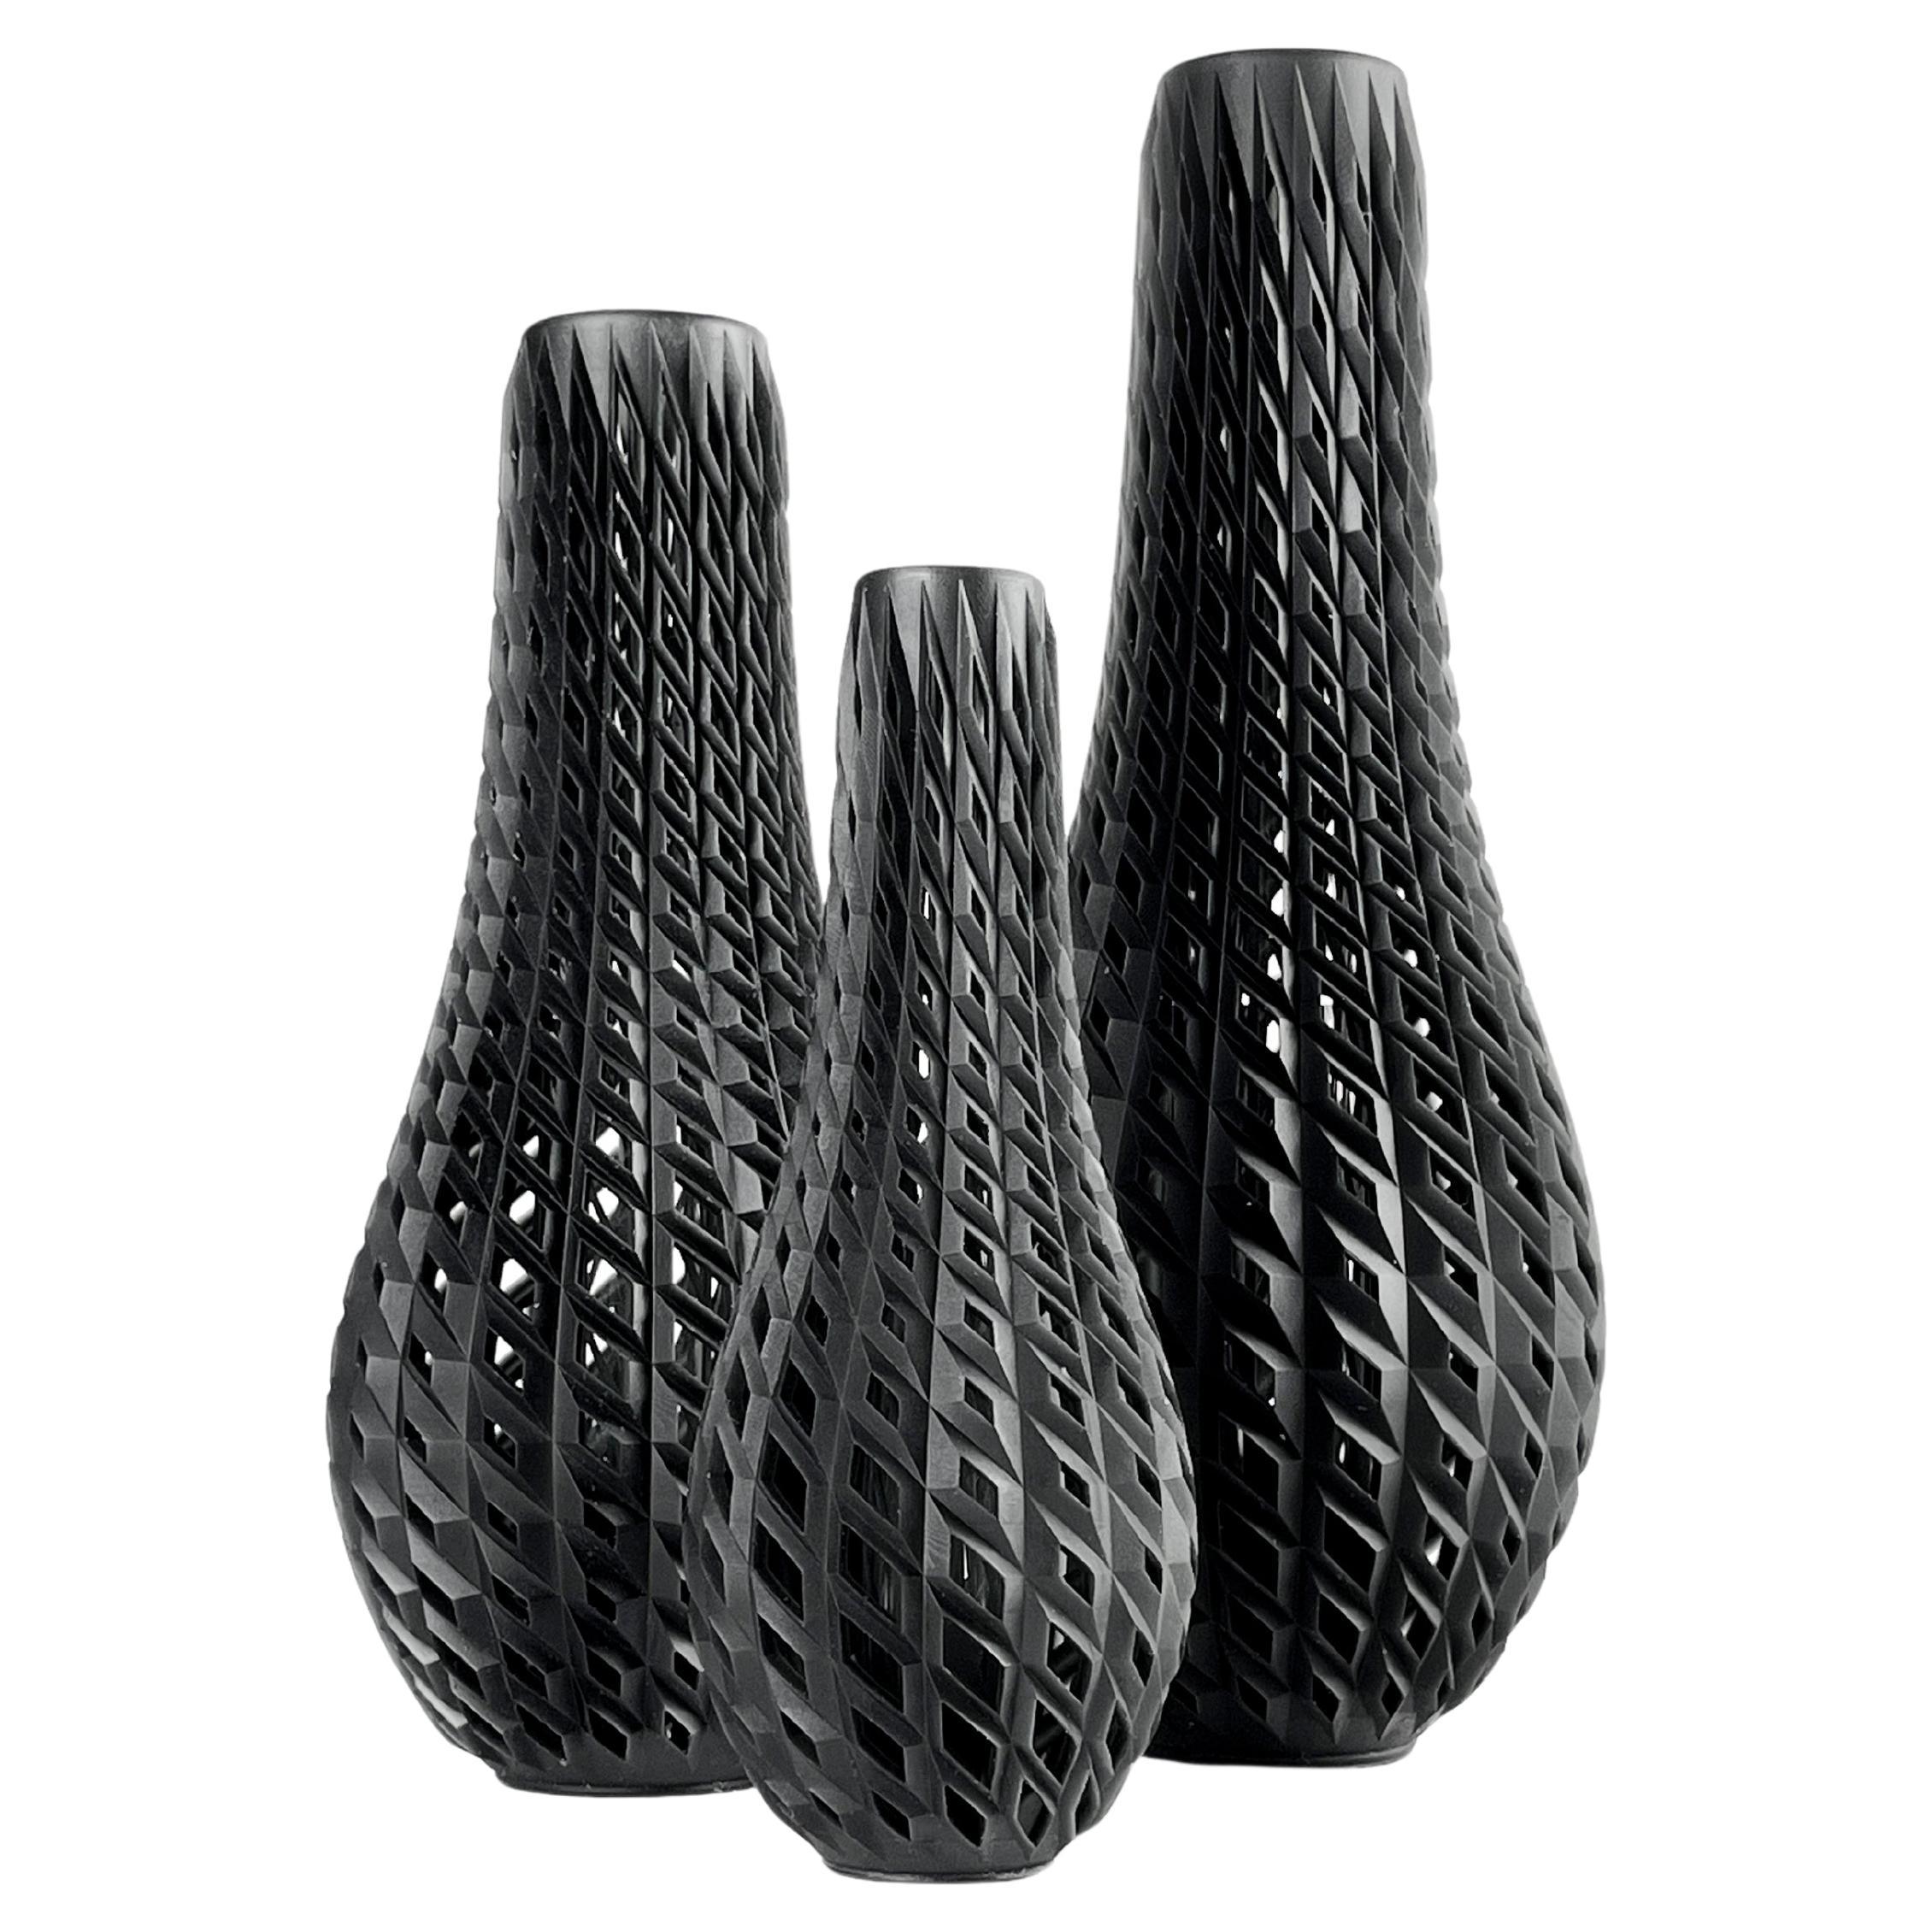 Modern Vase "CONE" Set of 3 Vases, made of Bio Resin, Germany For Sale